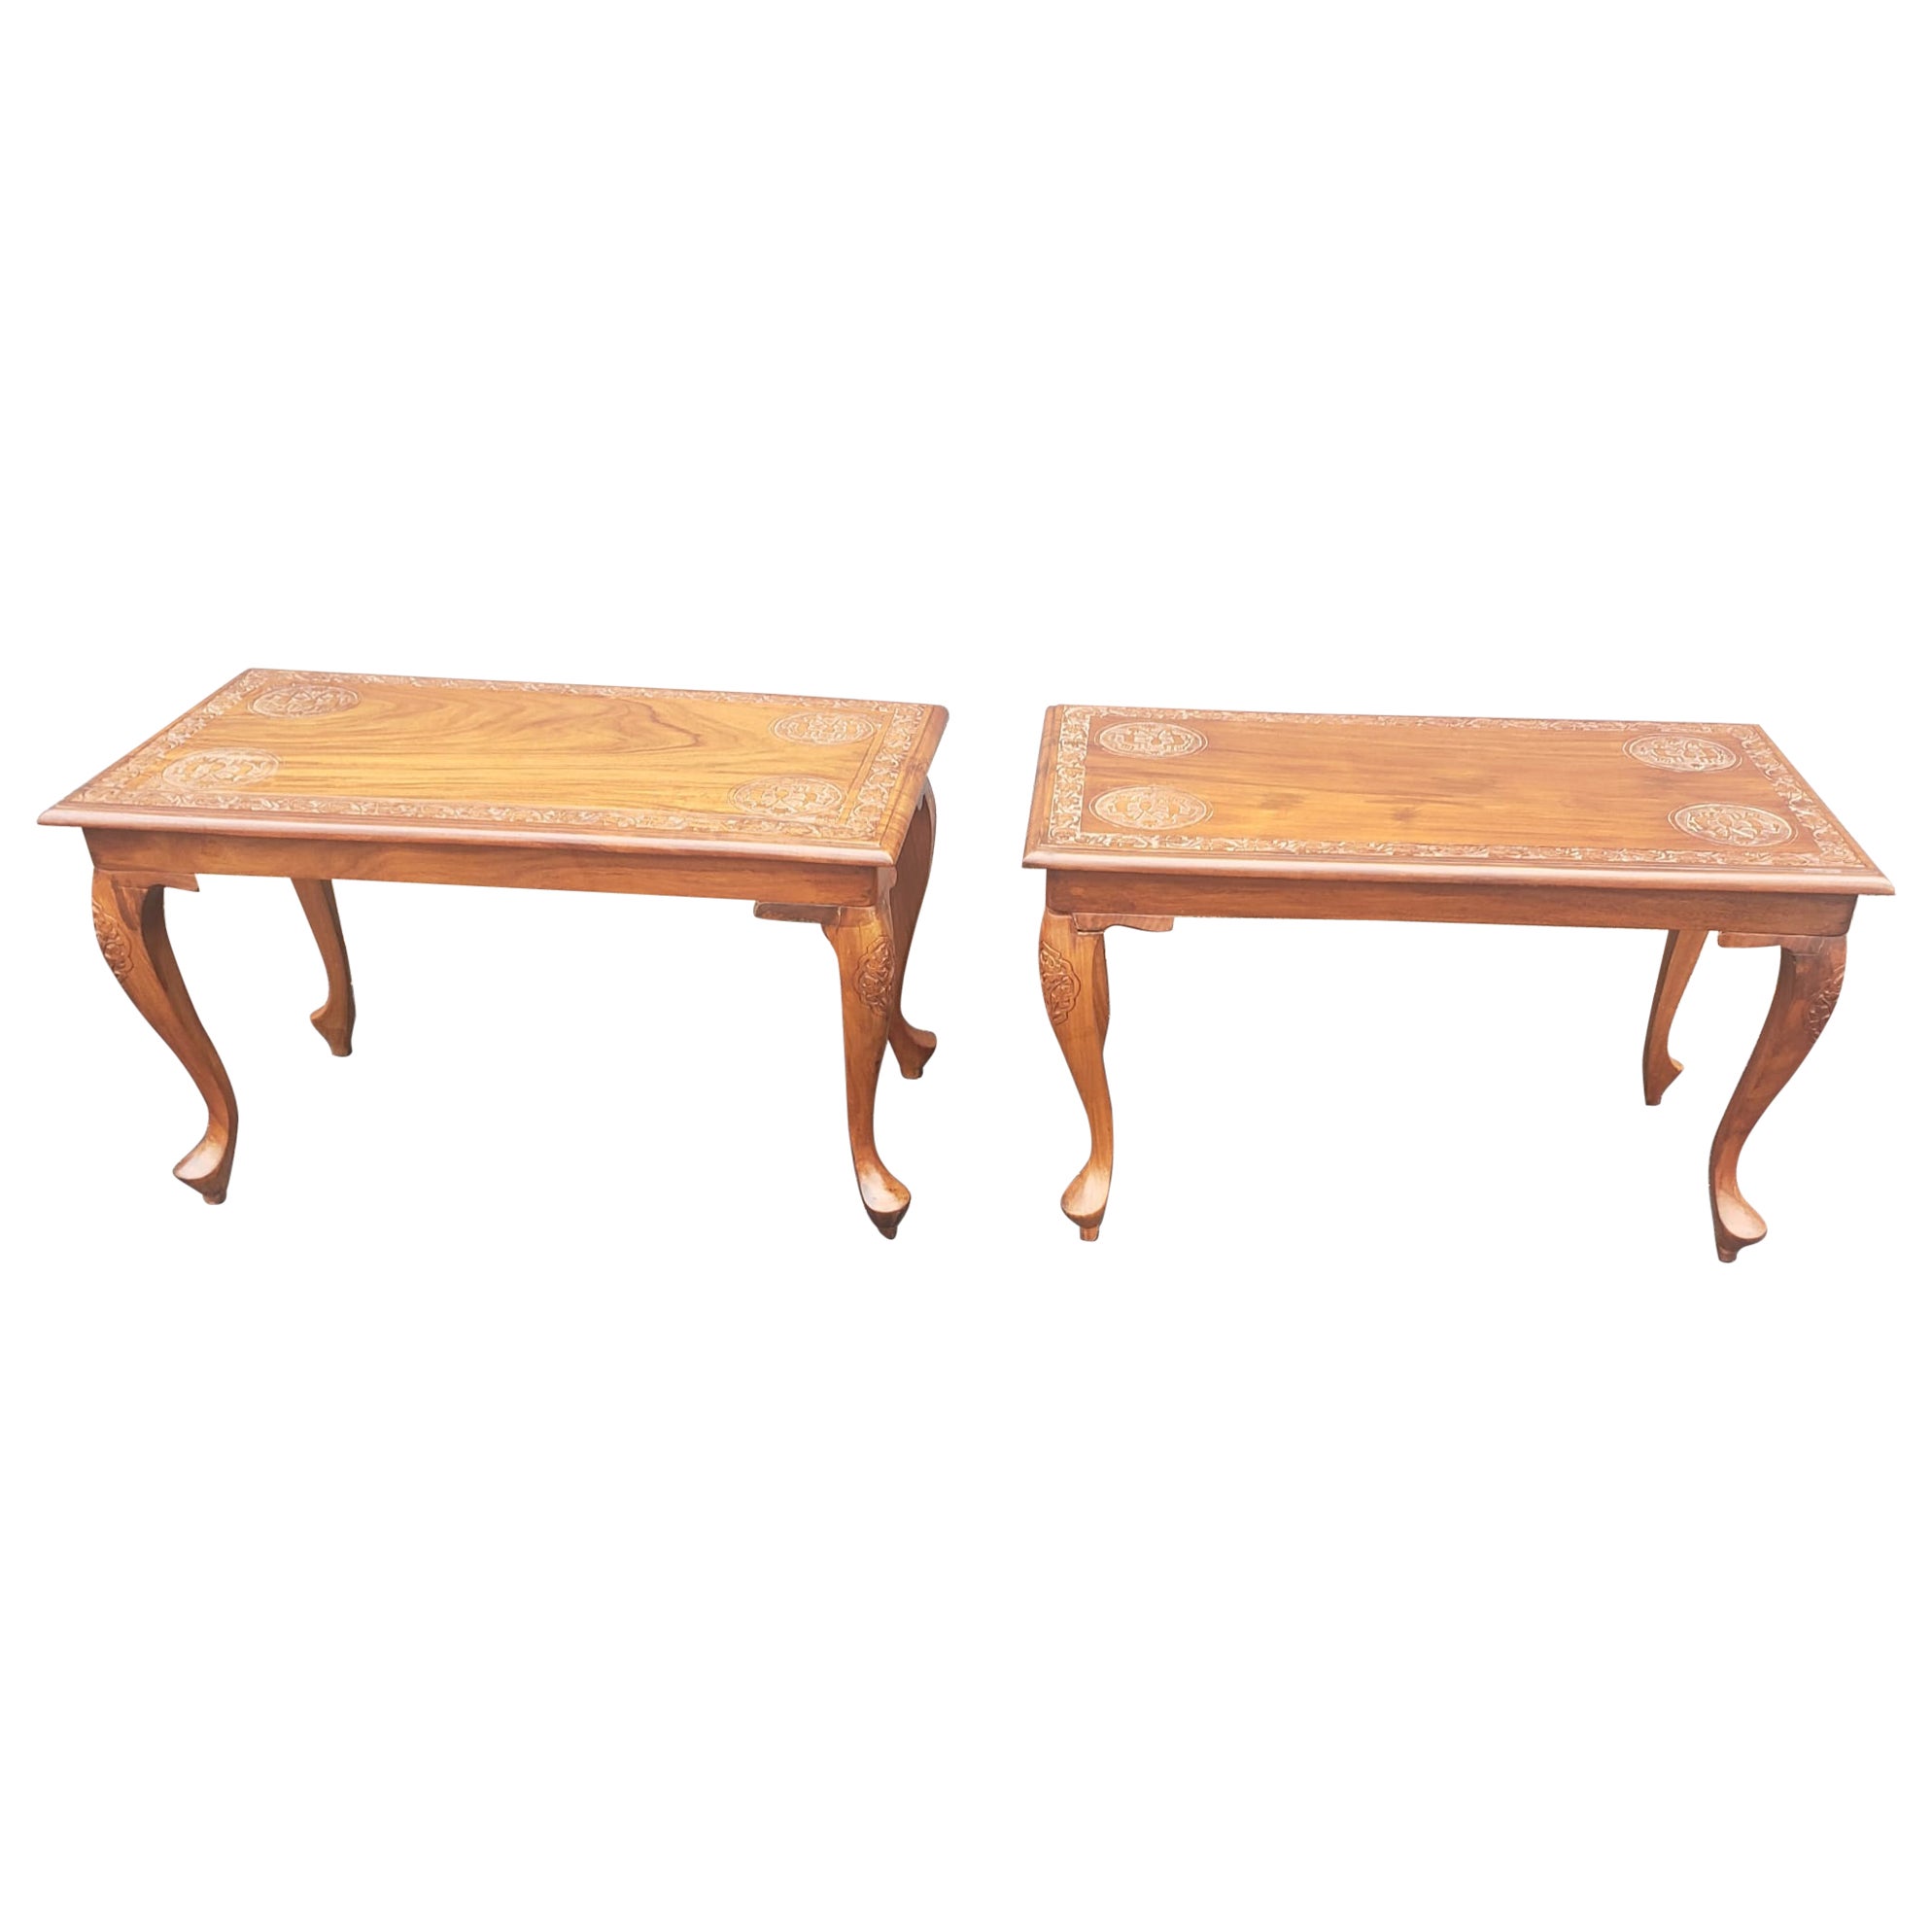 Midcentury Anglo-Japanese Carved Hardwood Low Side Tables, a Pair For Sale